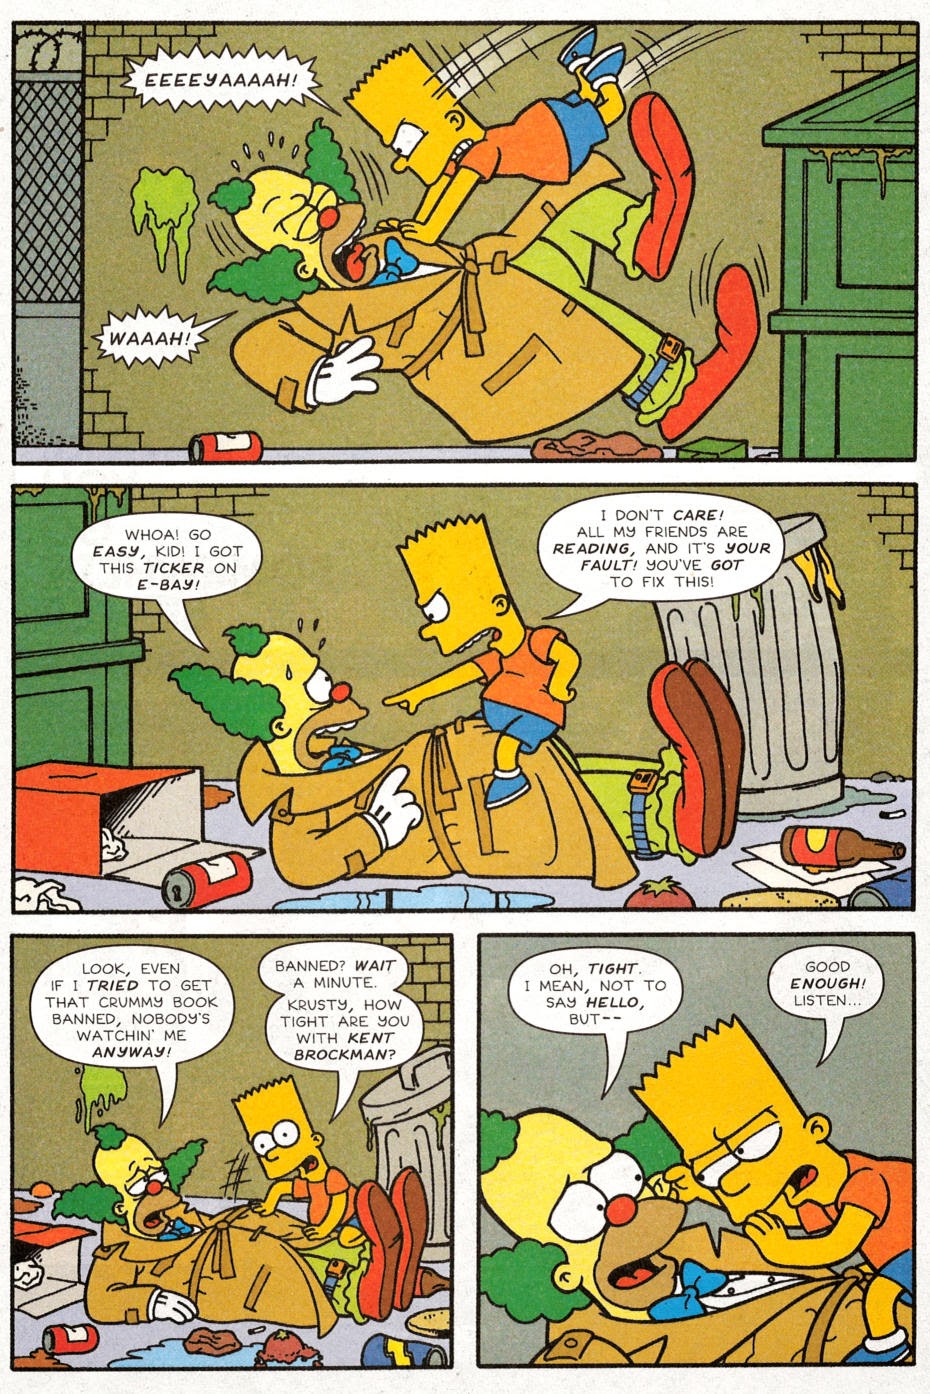 Read online Bart Simpson comic -  Issue #30 - 11